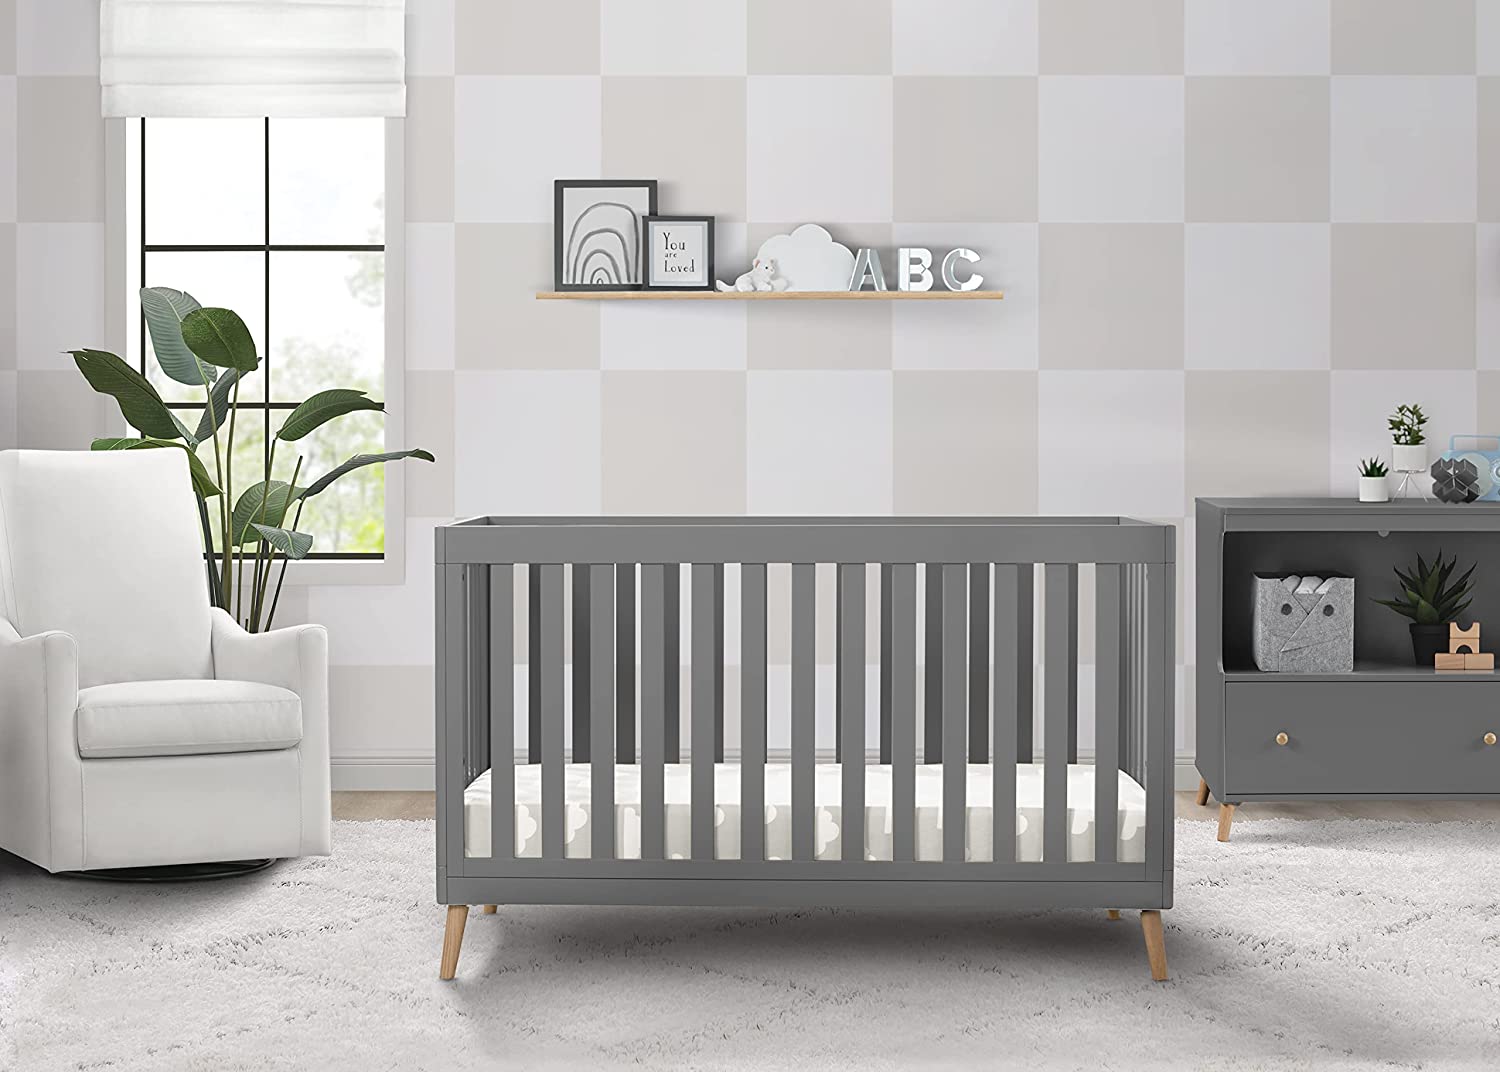 Delta Children Essex 4-in-1 Convertible Baby Crib, Grey with Natural Legs Crib Grey - image 3 of 12